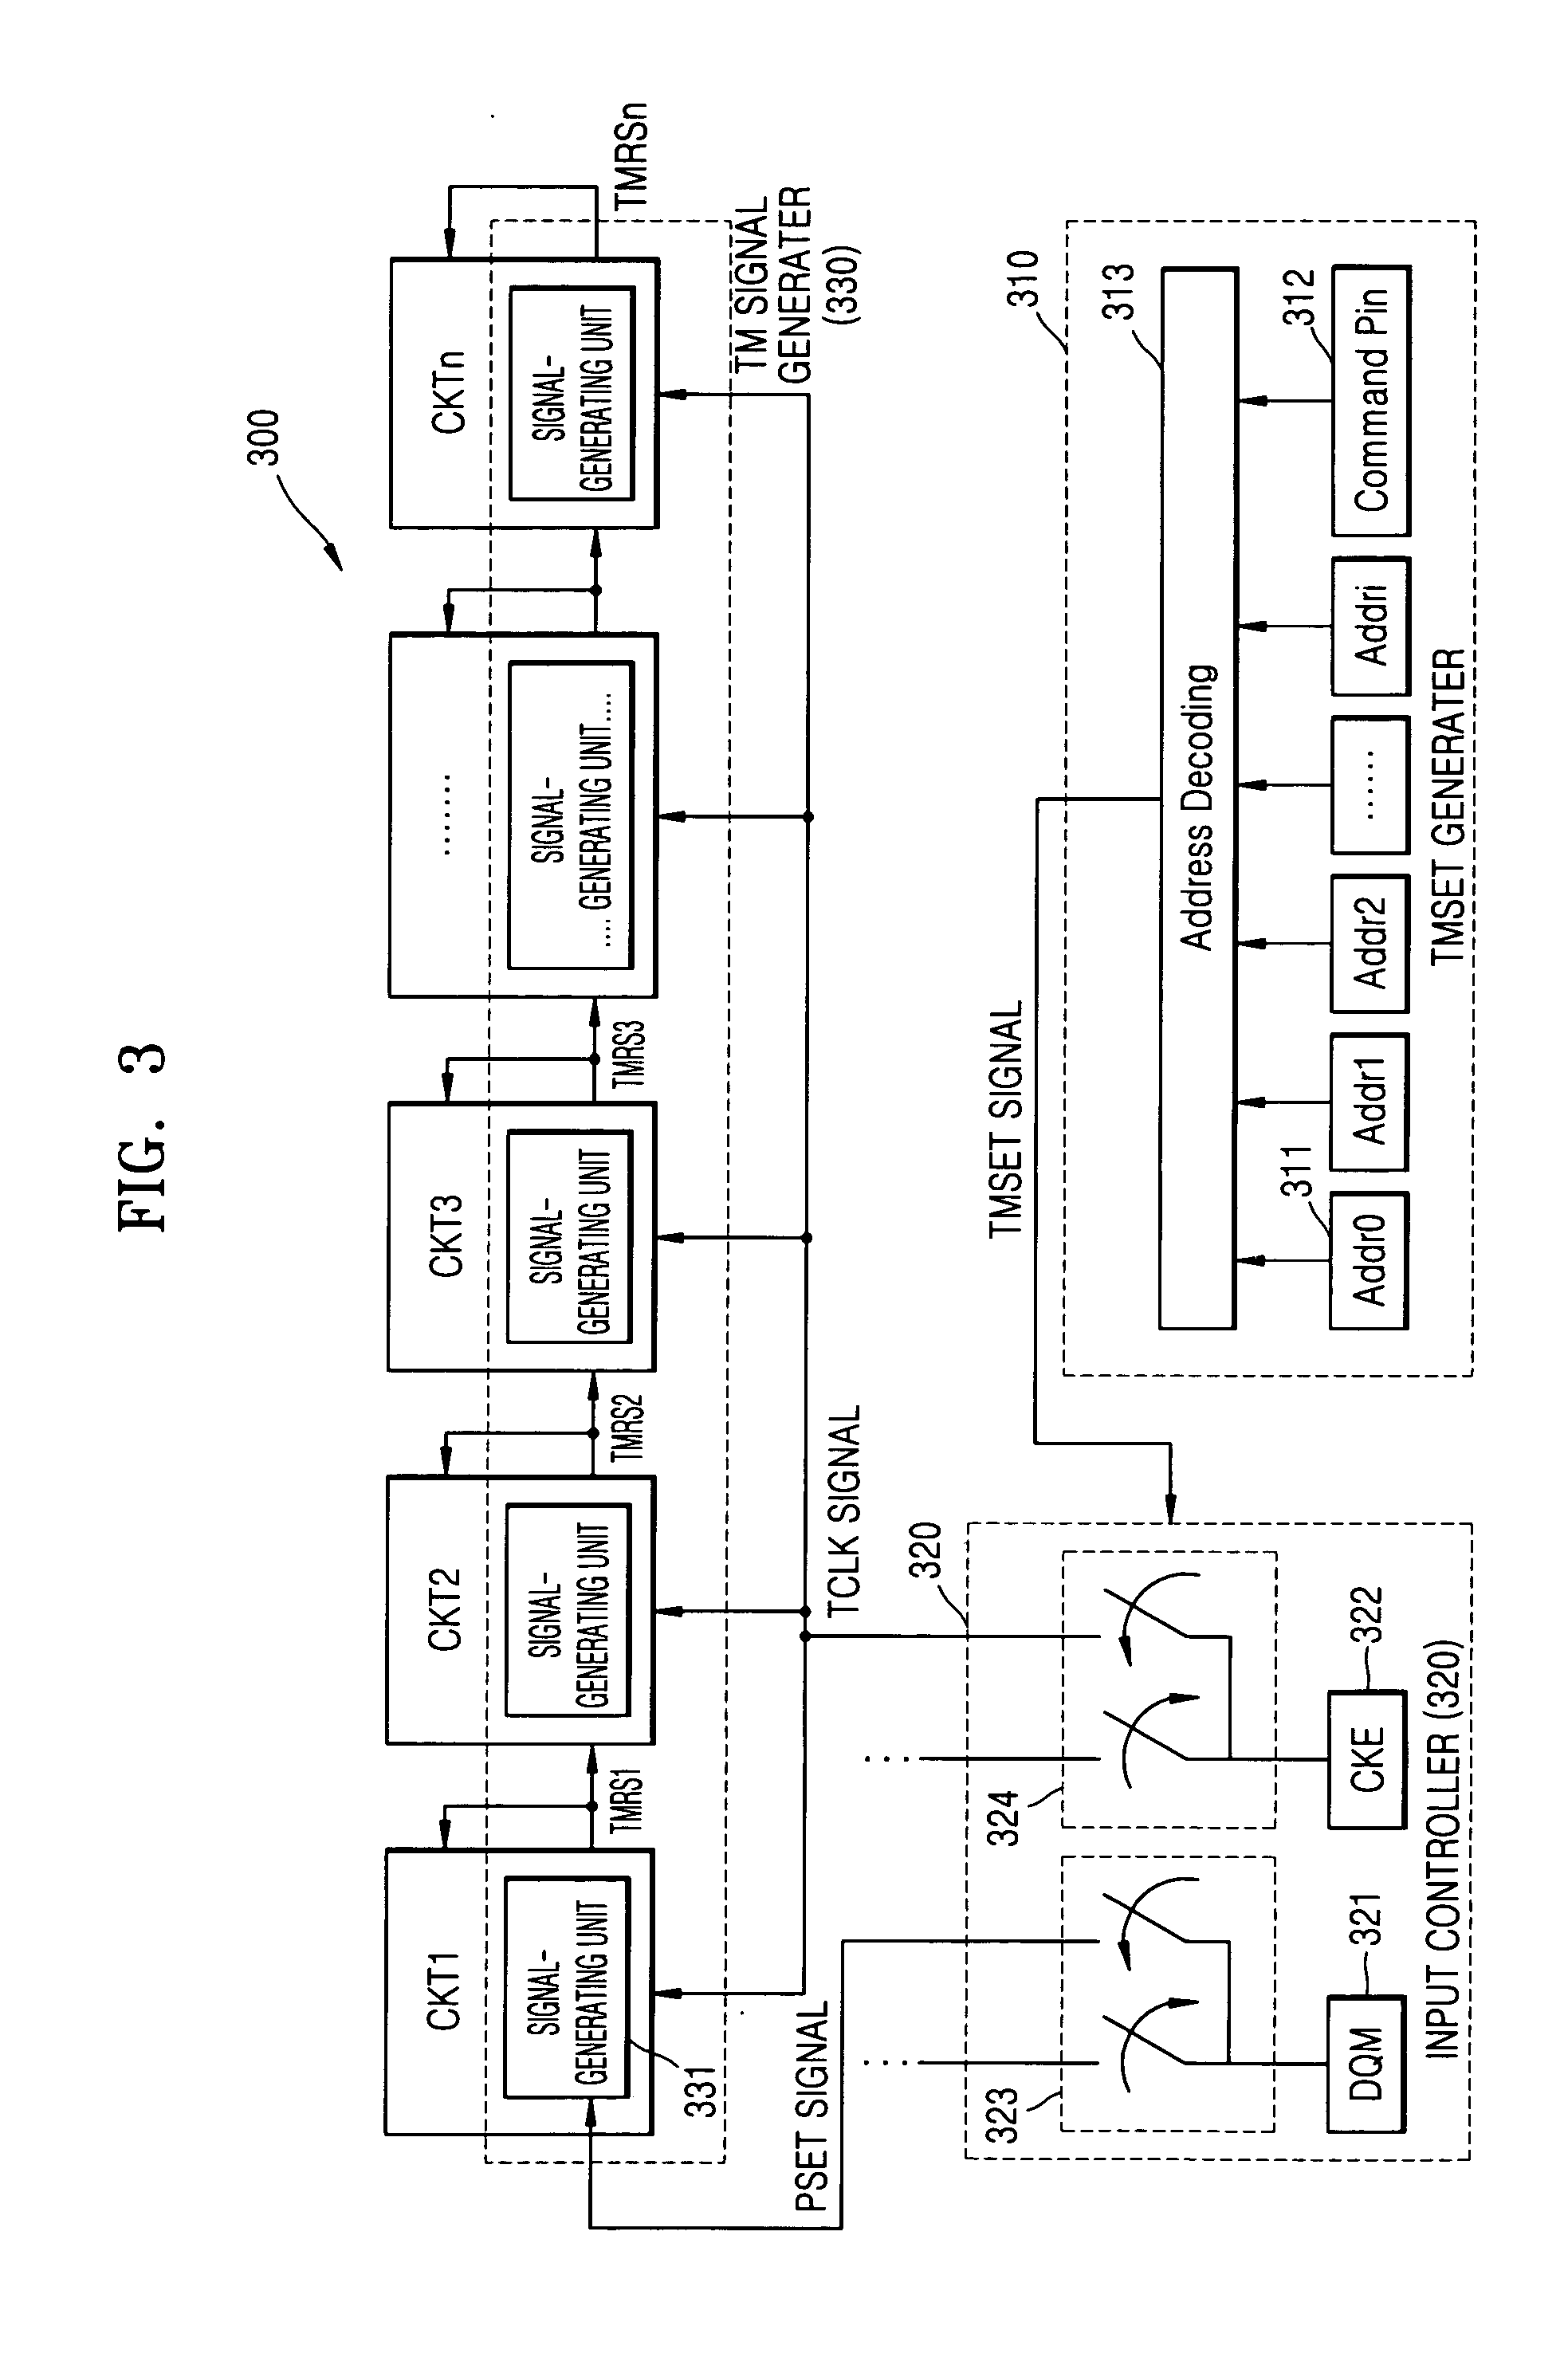 Generation of test mode signals in memory device with minimized wiring